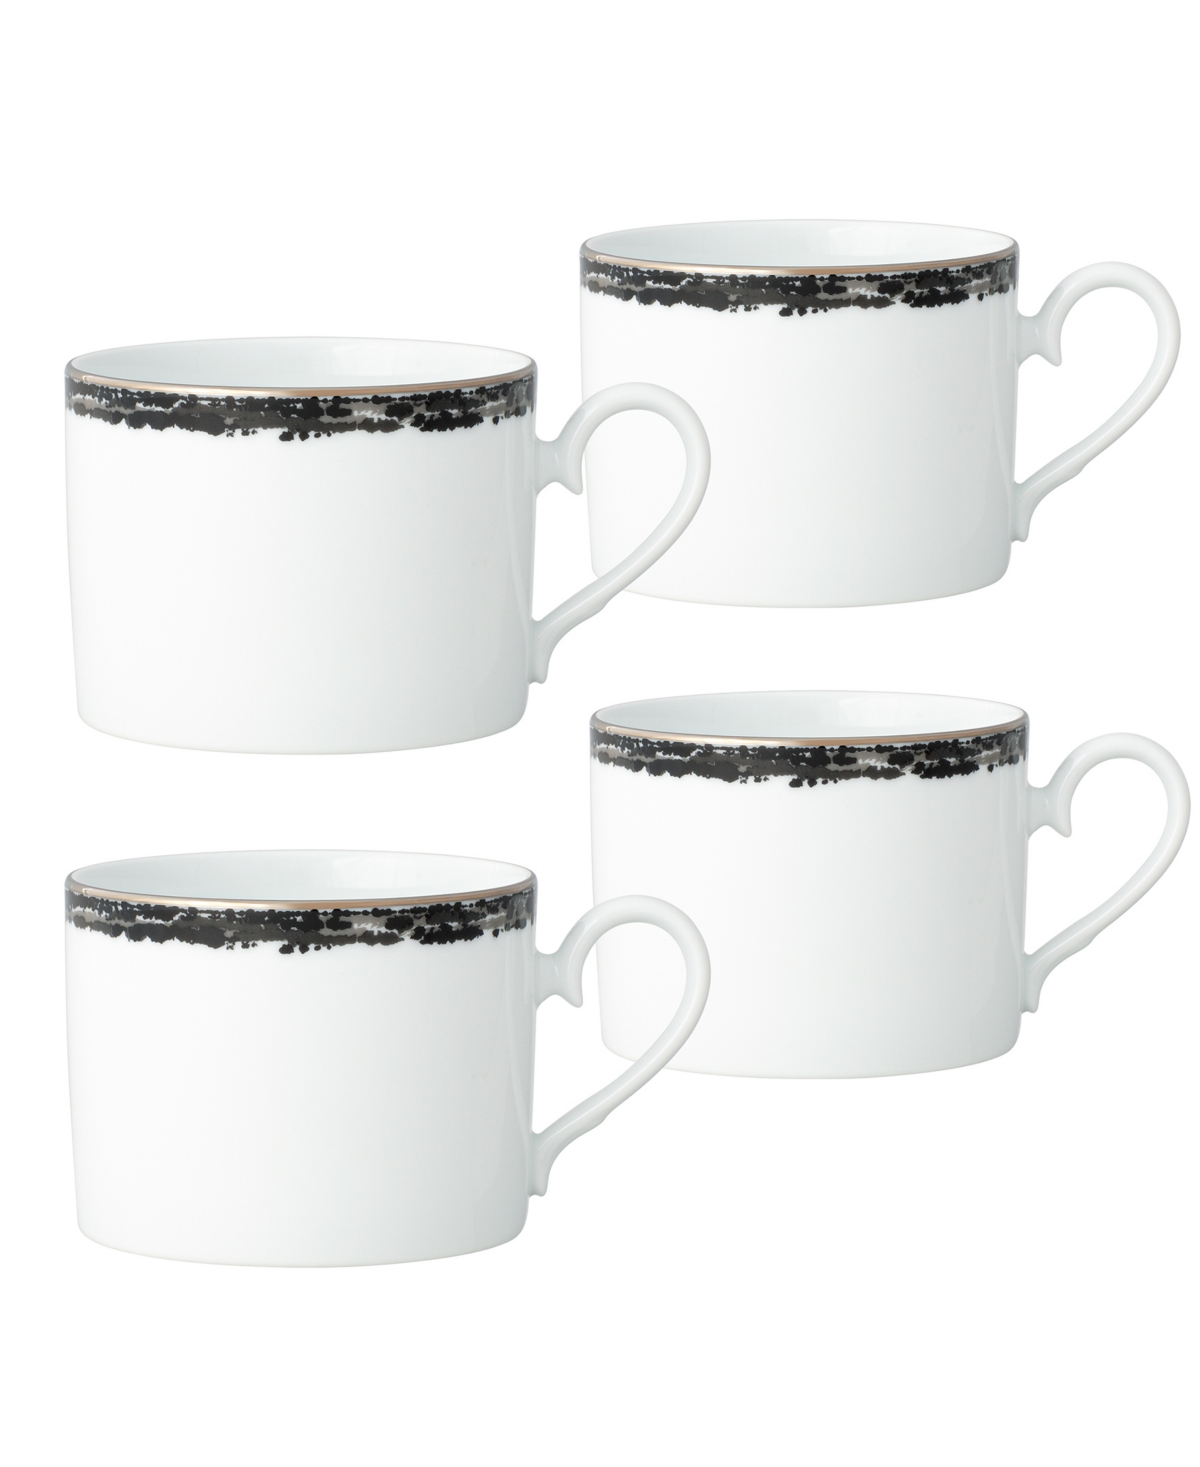 Noritake Rill 4 Piece Cup Set, Service For 4 In Black